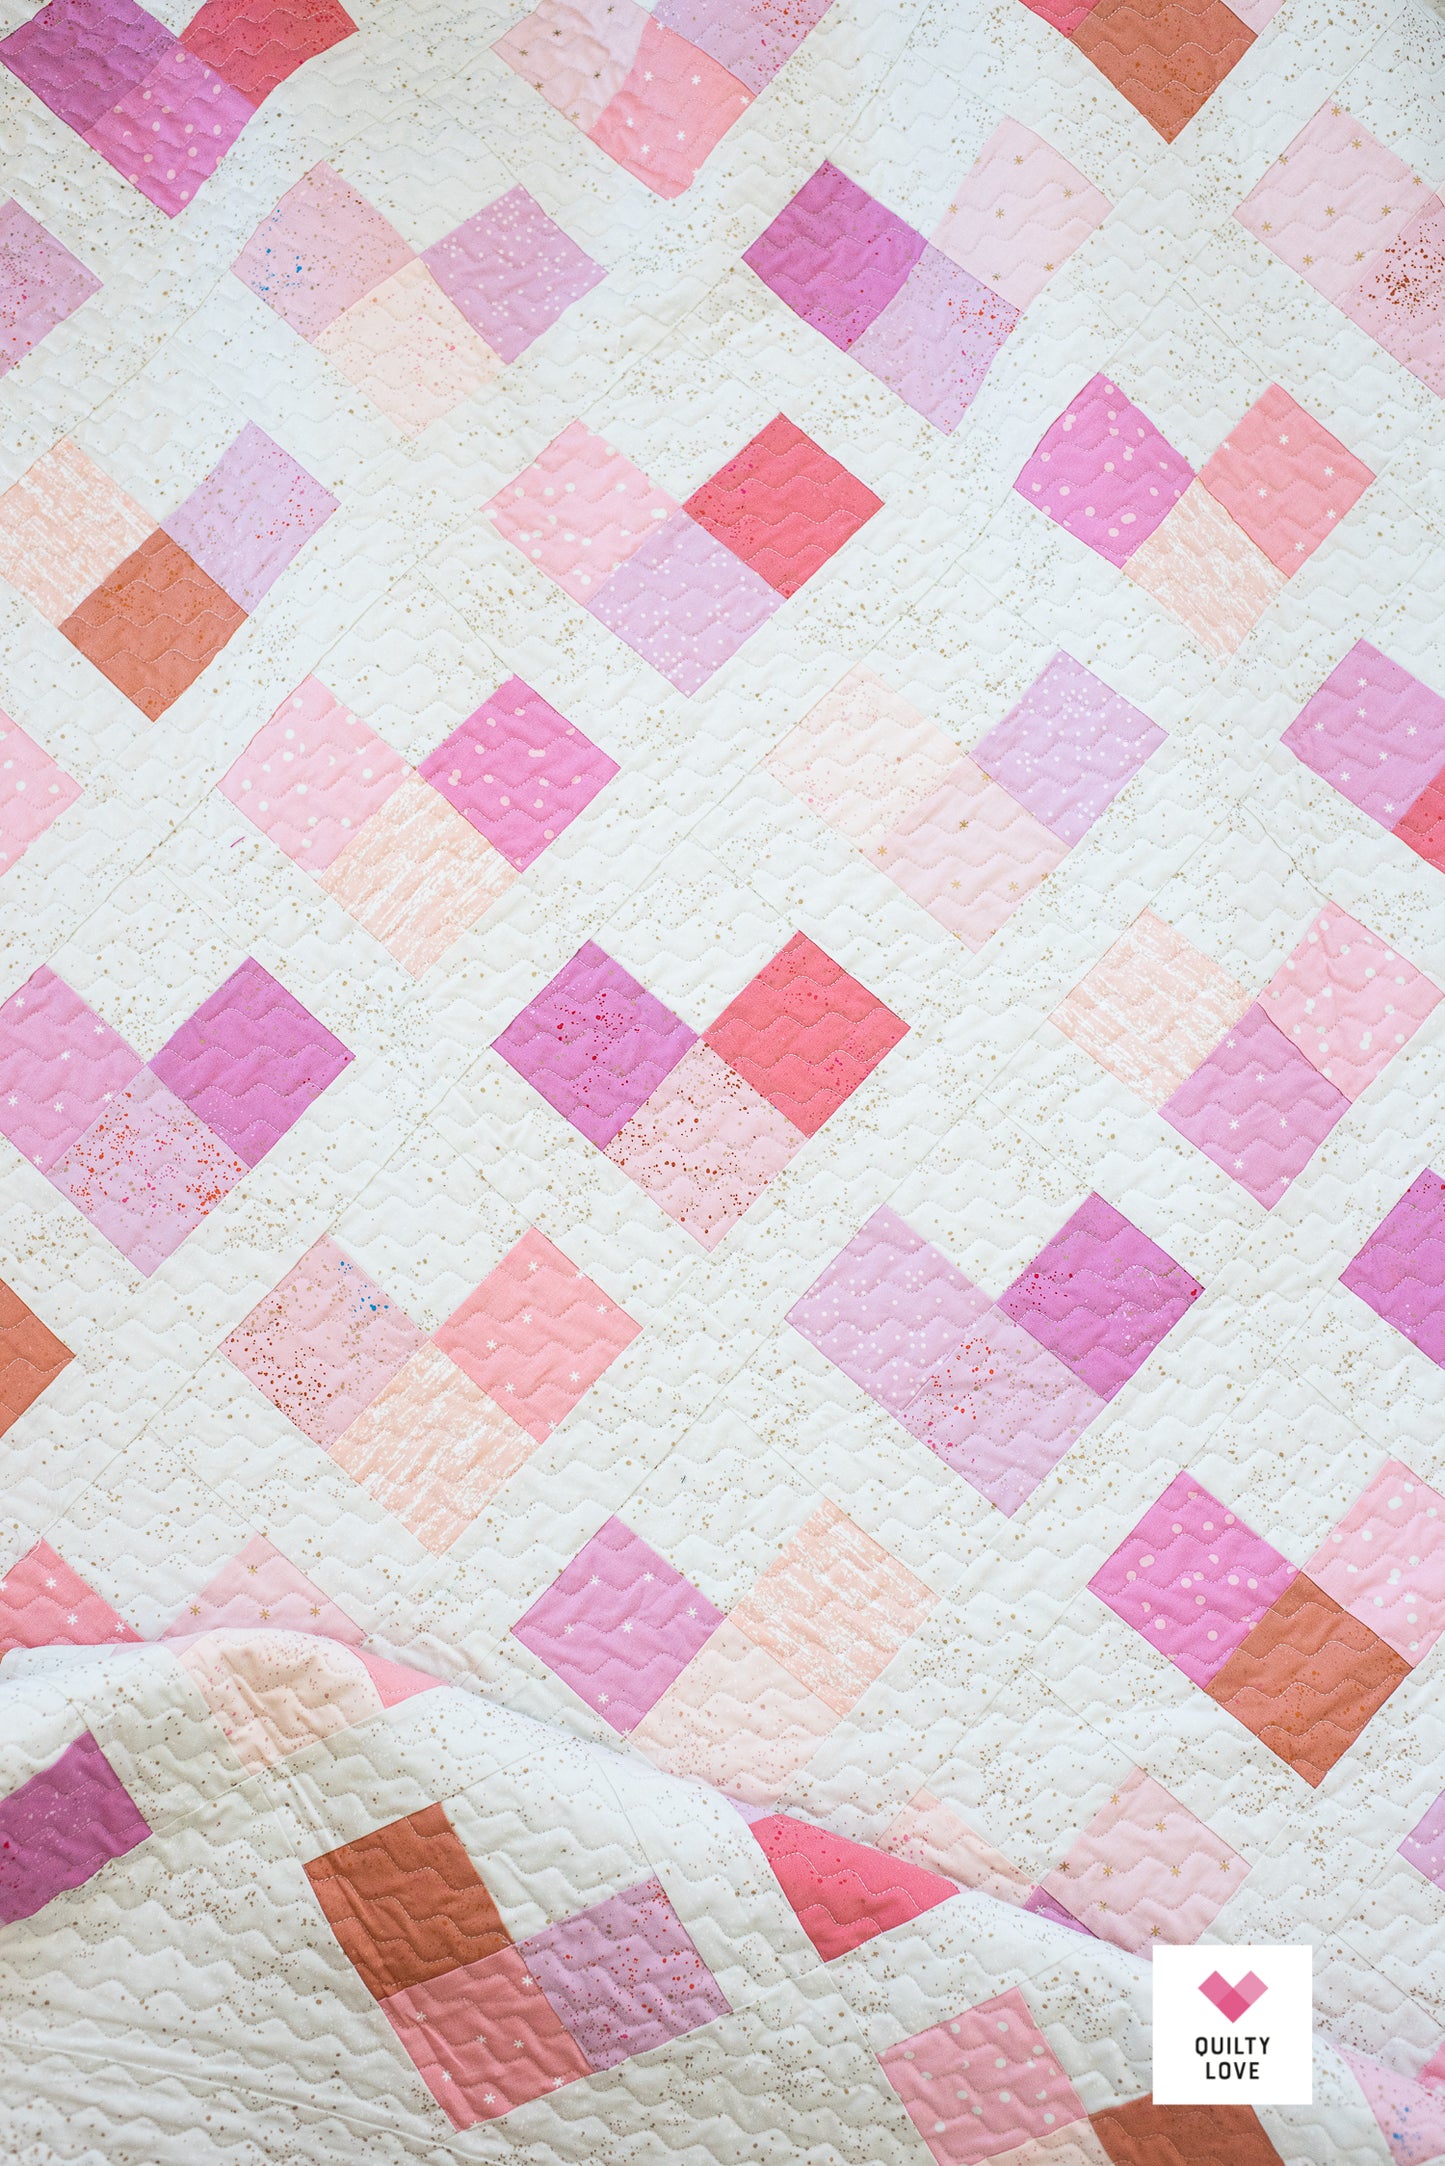 Quilty Hearts Quilt Kit